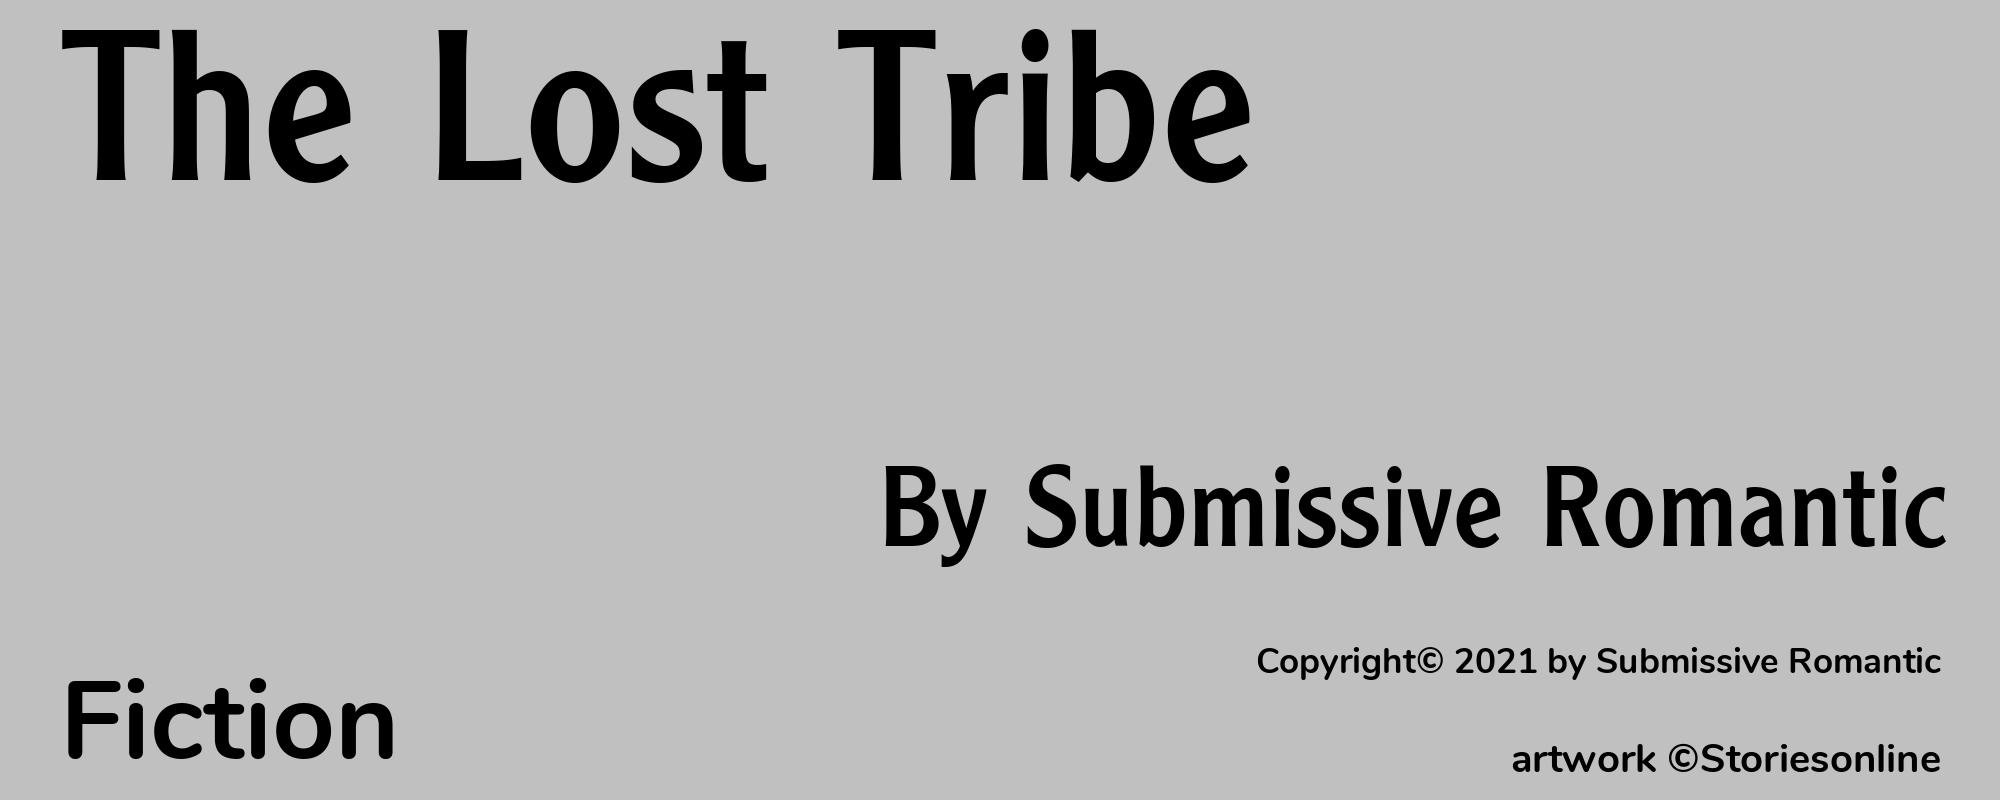 The Lost Tribe - Cover